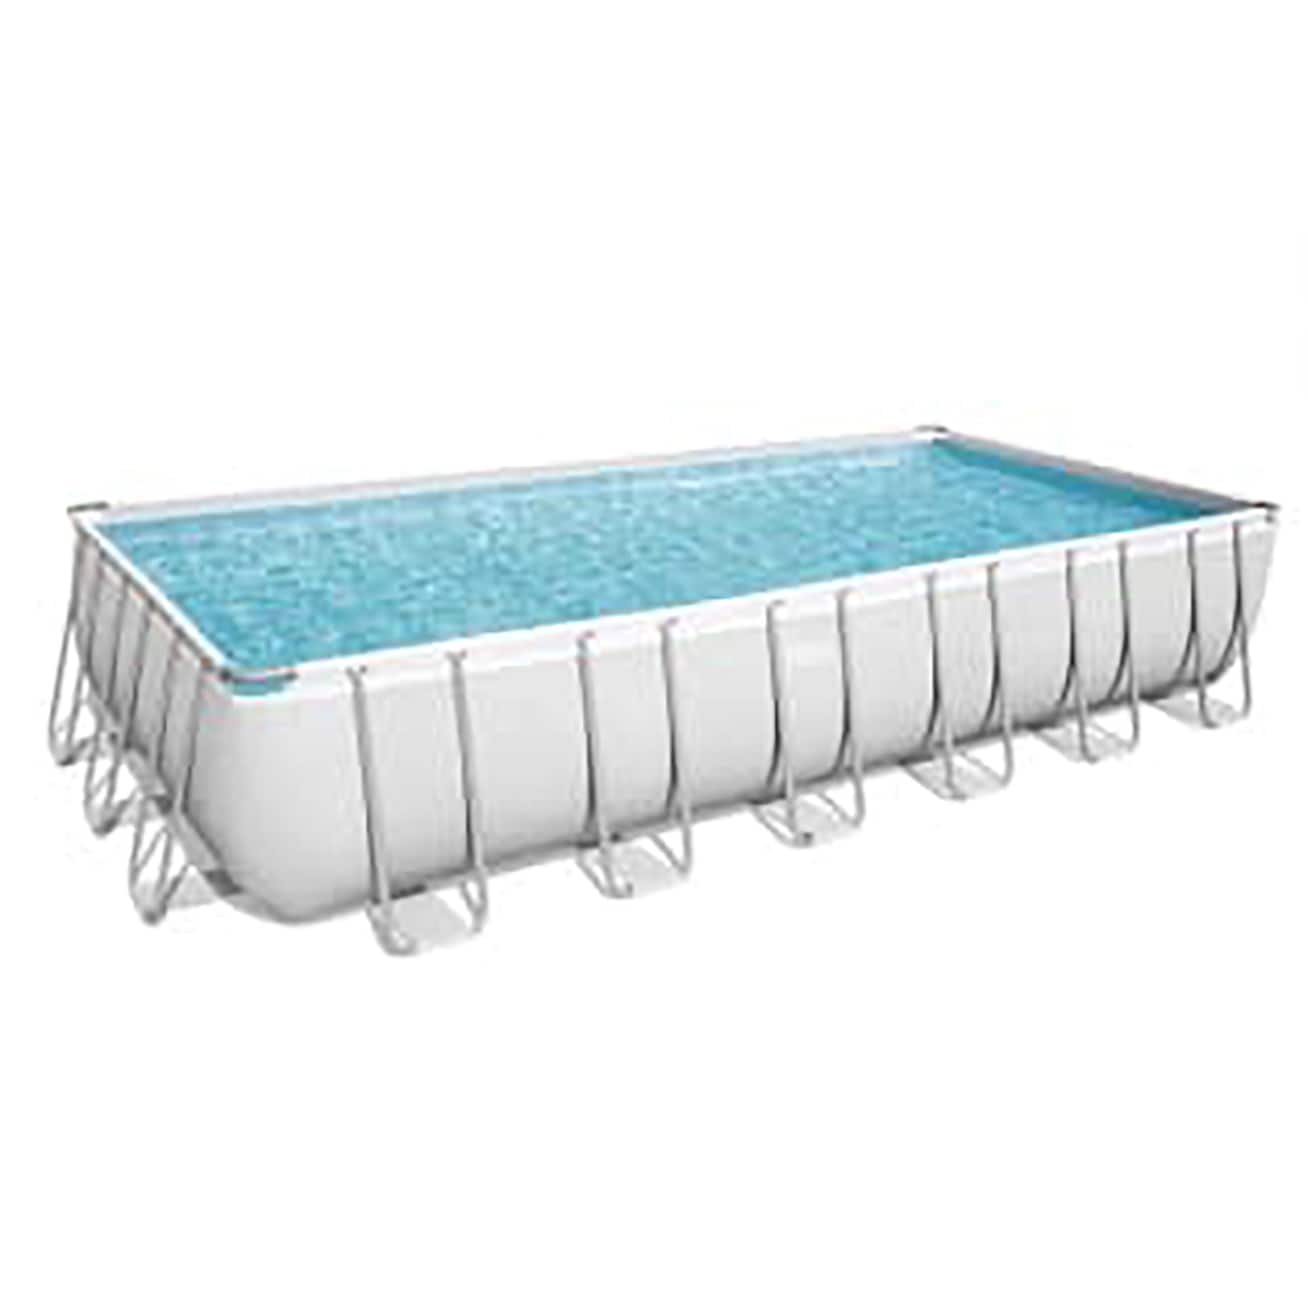 Image for 24 ft. Rectangular Above Ground Pools